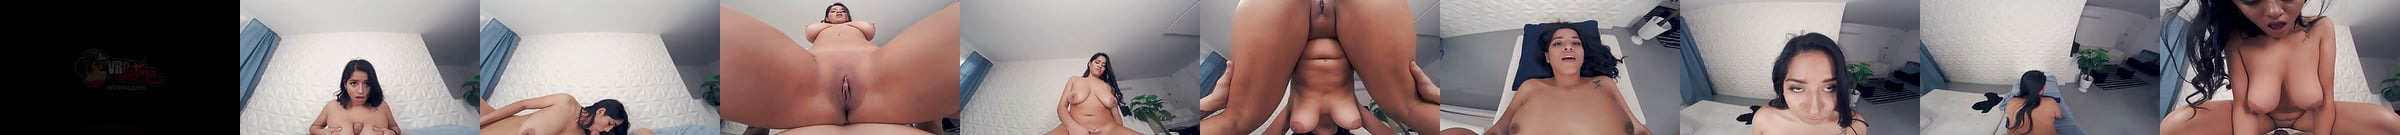 🍑 Big Ass Vr Porn Videos With Spicy Pawg Girls Xhamster